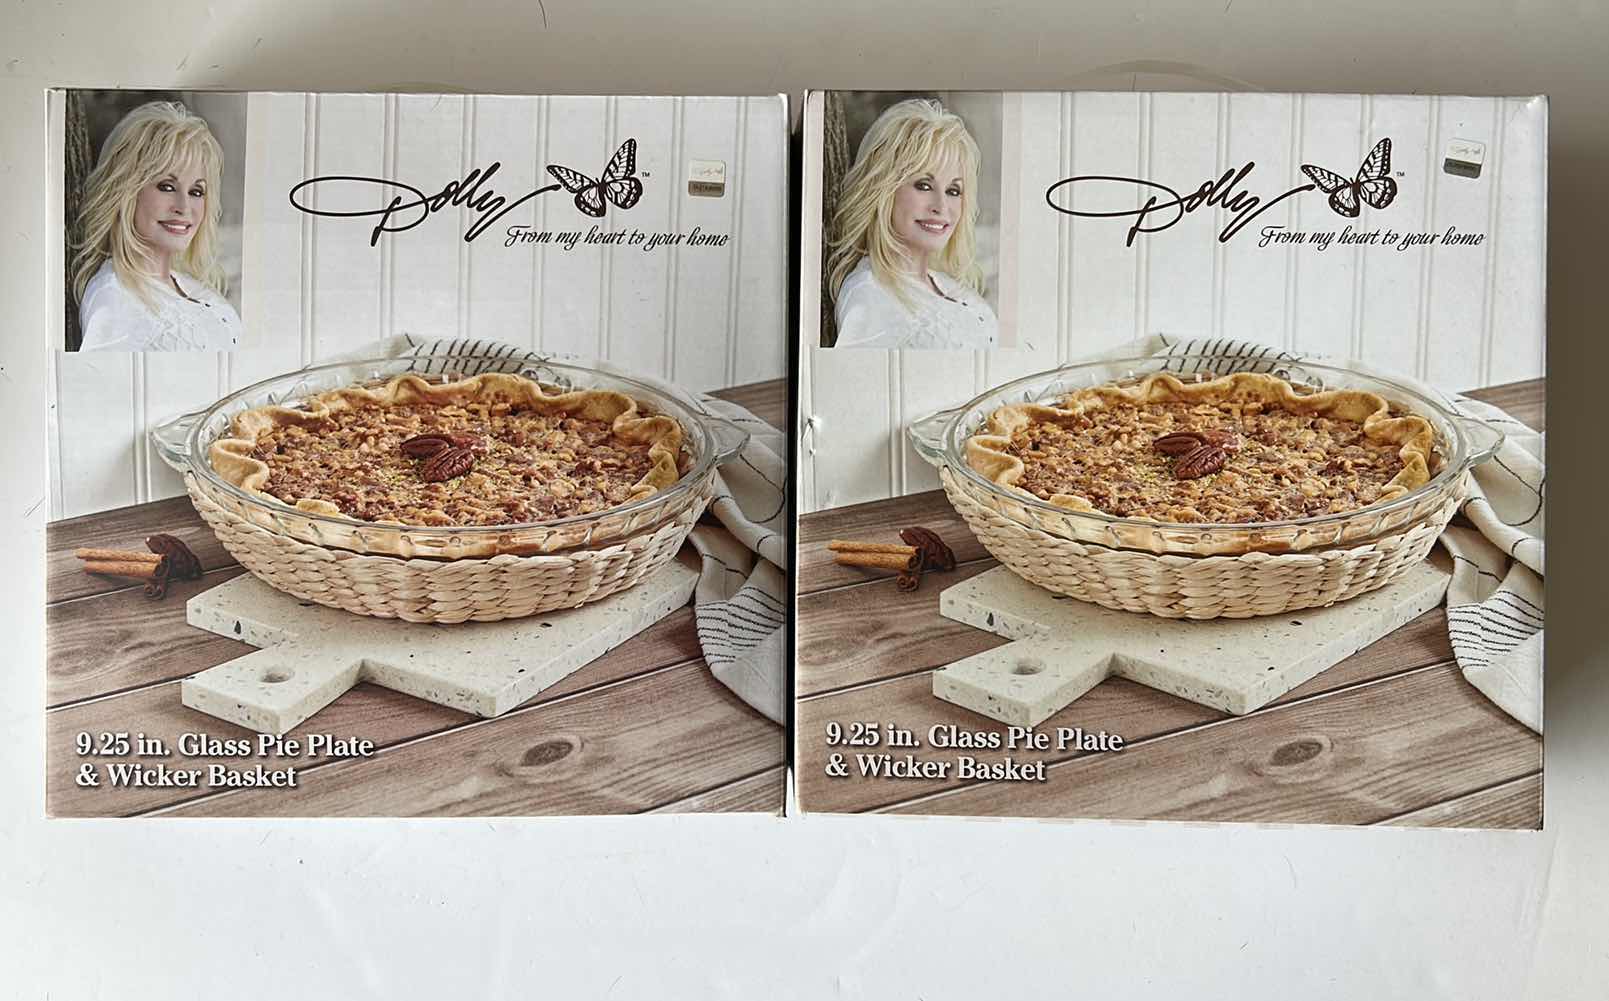 Photo 1 of 2 NEW DOLLY PARTON 9.25” GLASS PIE PLATE AND WICKER BASKET